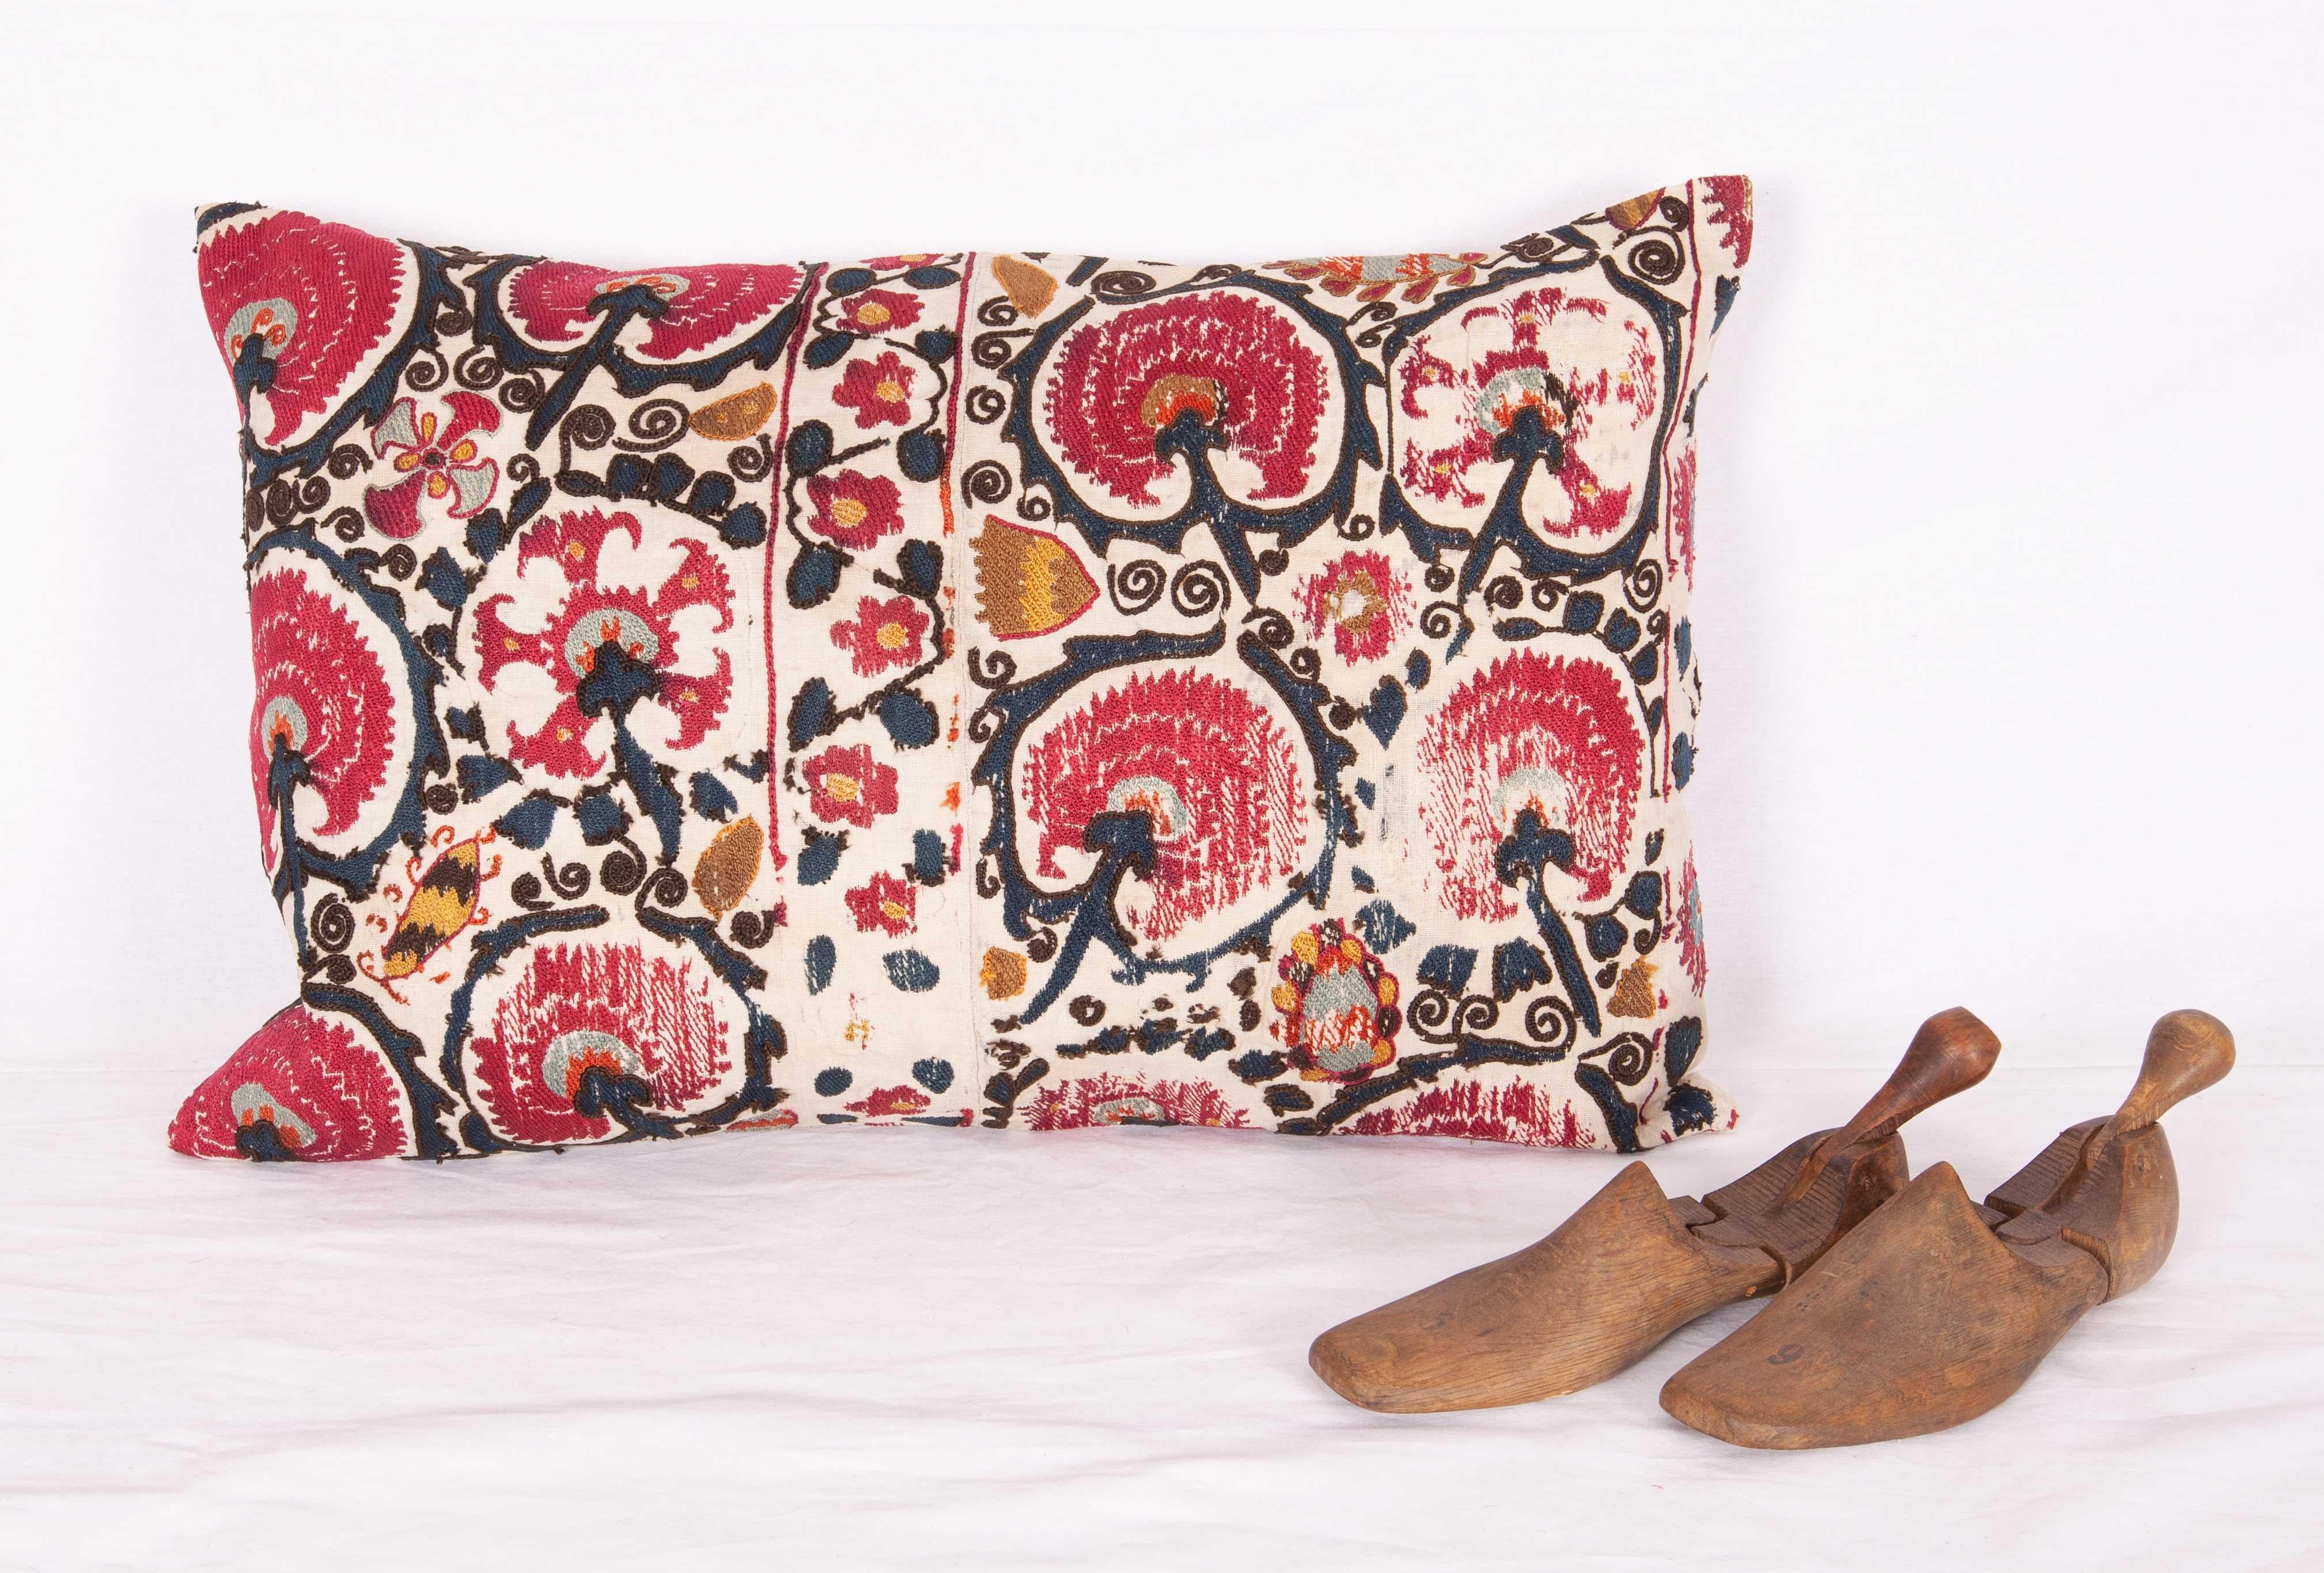 The pillow case is made from an antique Tajik Suzani from Ura Tube. It is silk embroidery on a handwoven cotton field. The backing is pure linen, and they do not come with inserts but bags made to the size in cotton to accommodate insert materials.